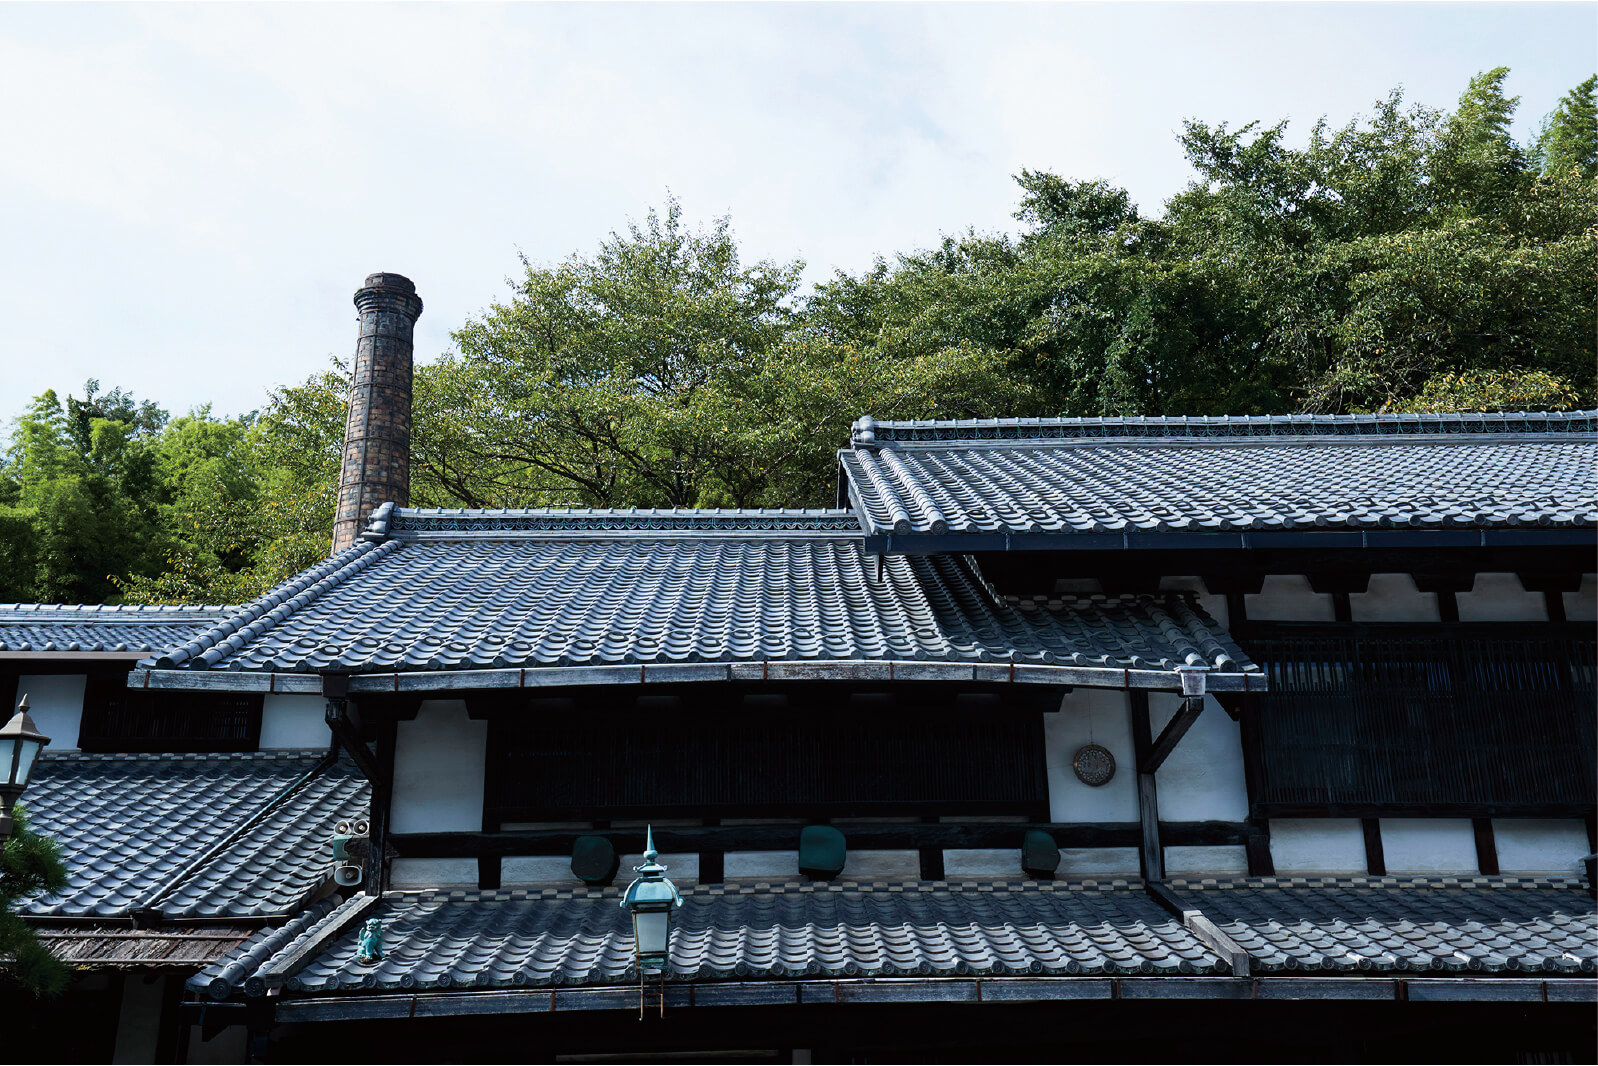 Founded in 1804 as the Official pottery of Edo Castle